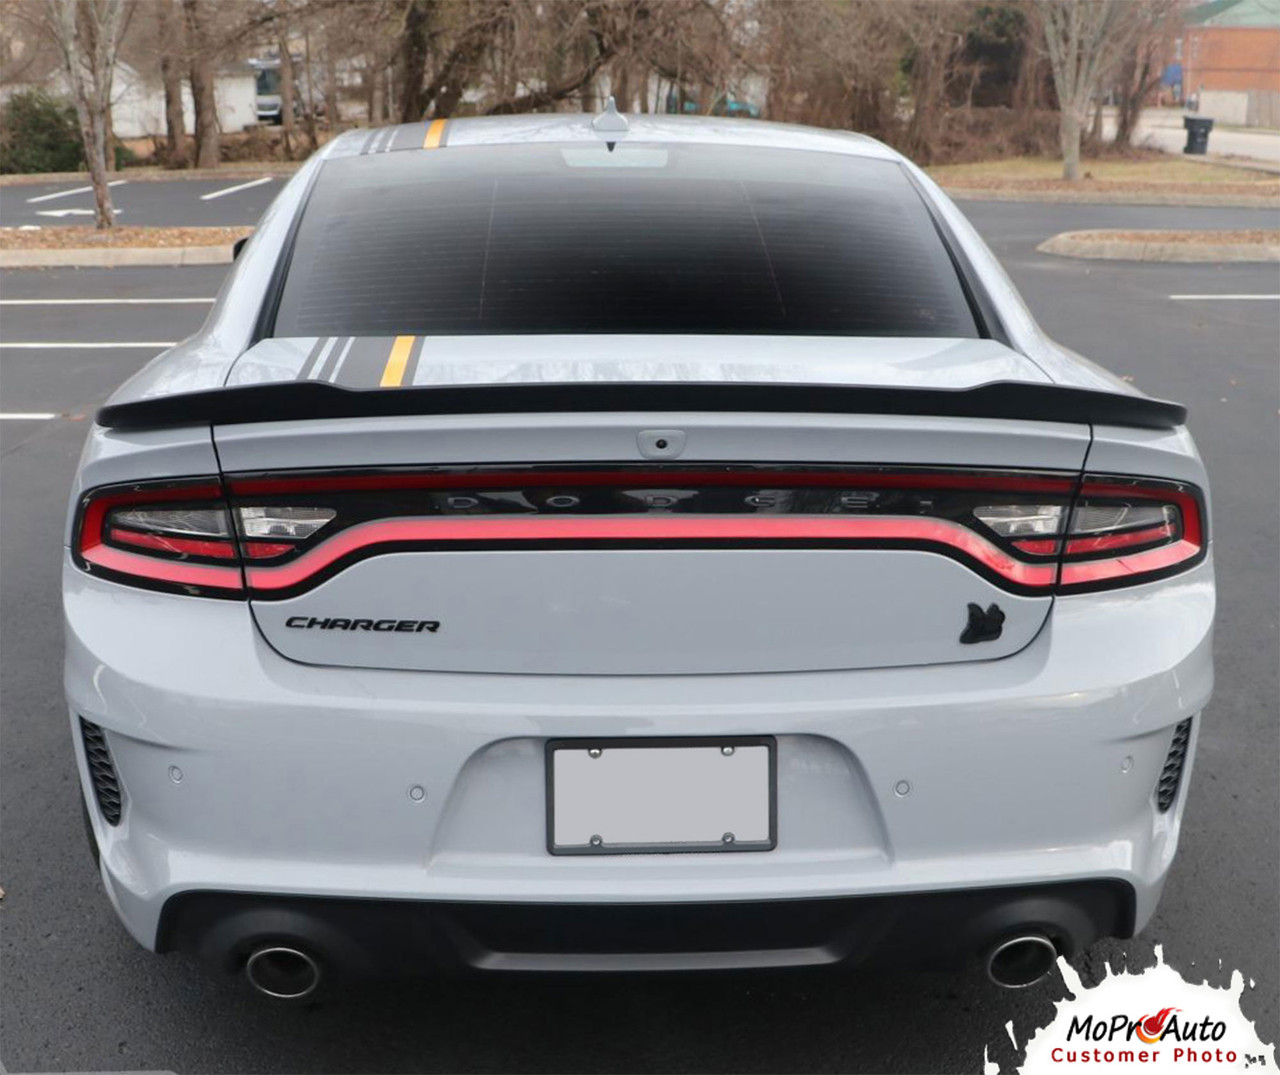 2015 CRUSH Dodge Charger E RALLY STRIPE Vinyl Graphics, Stripes and Decals Set